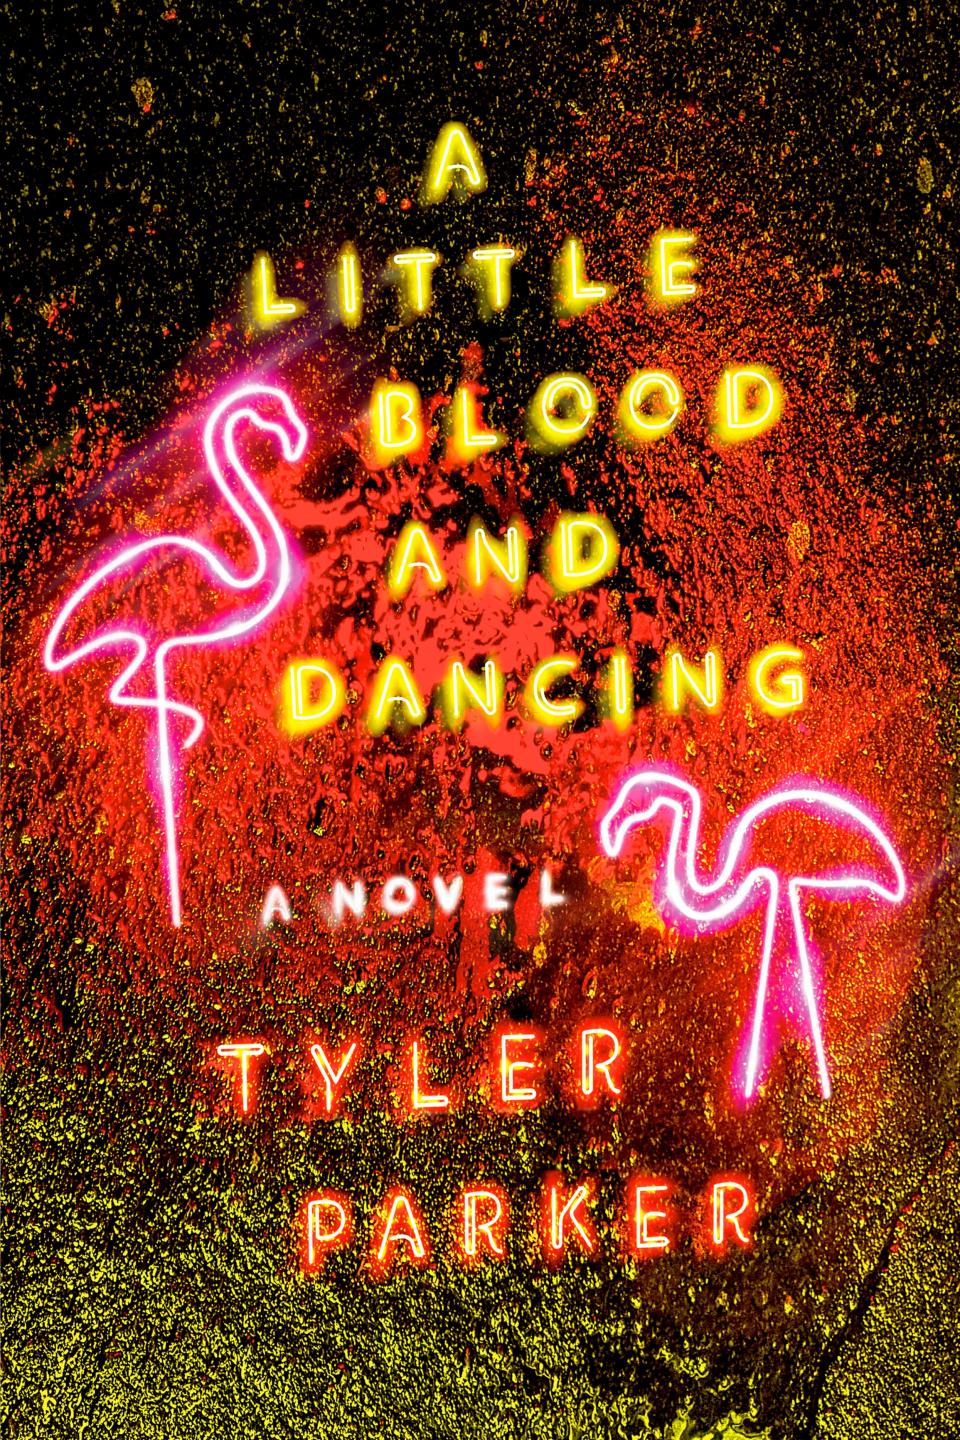 The book cover to author Tyler Parker's book "A Little Blood and Dancing."